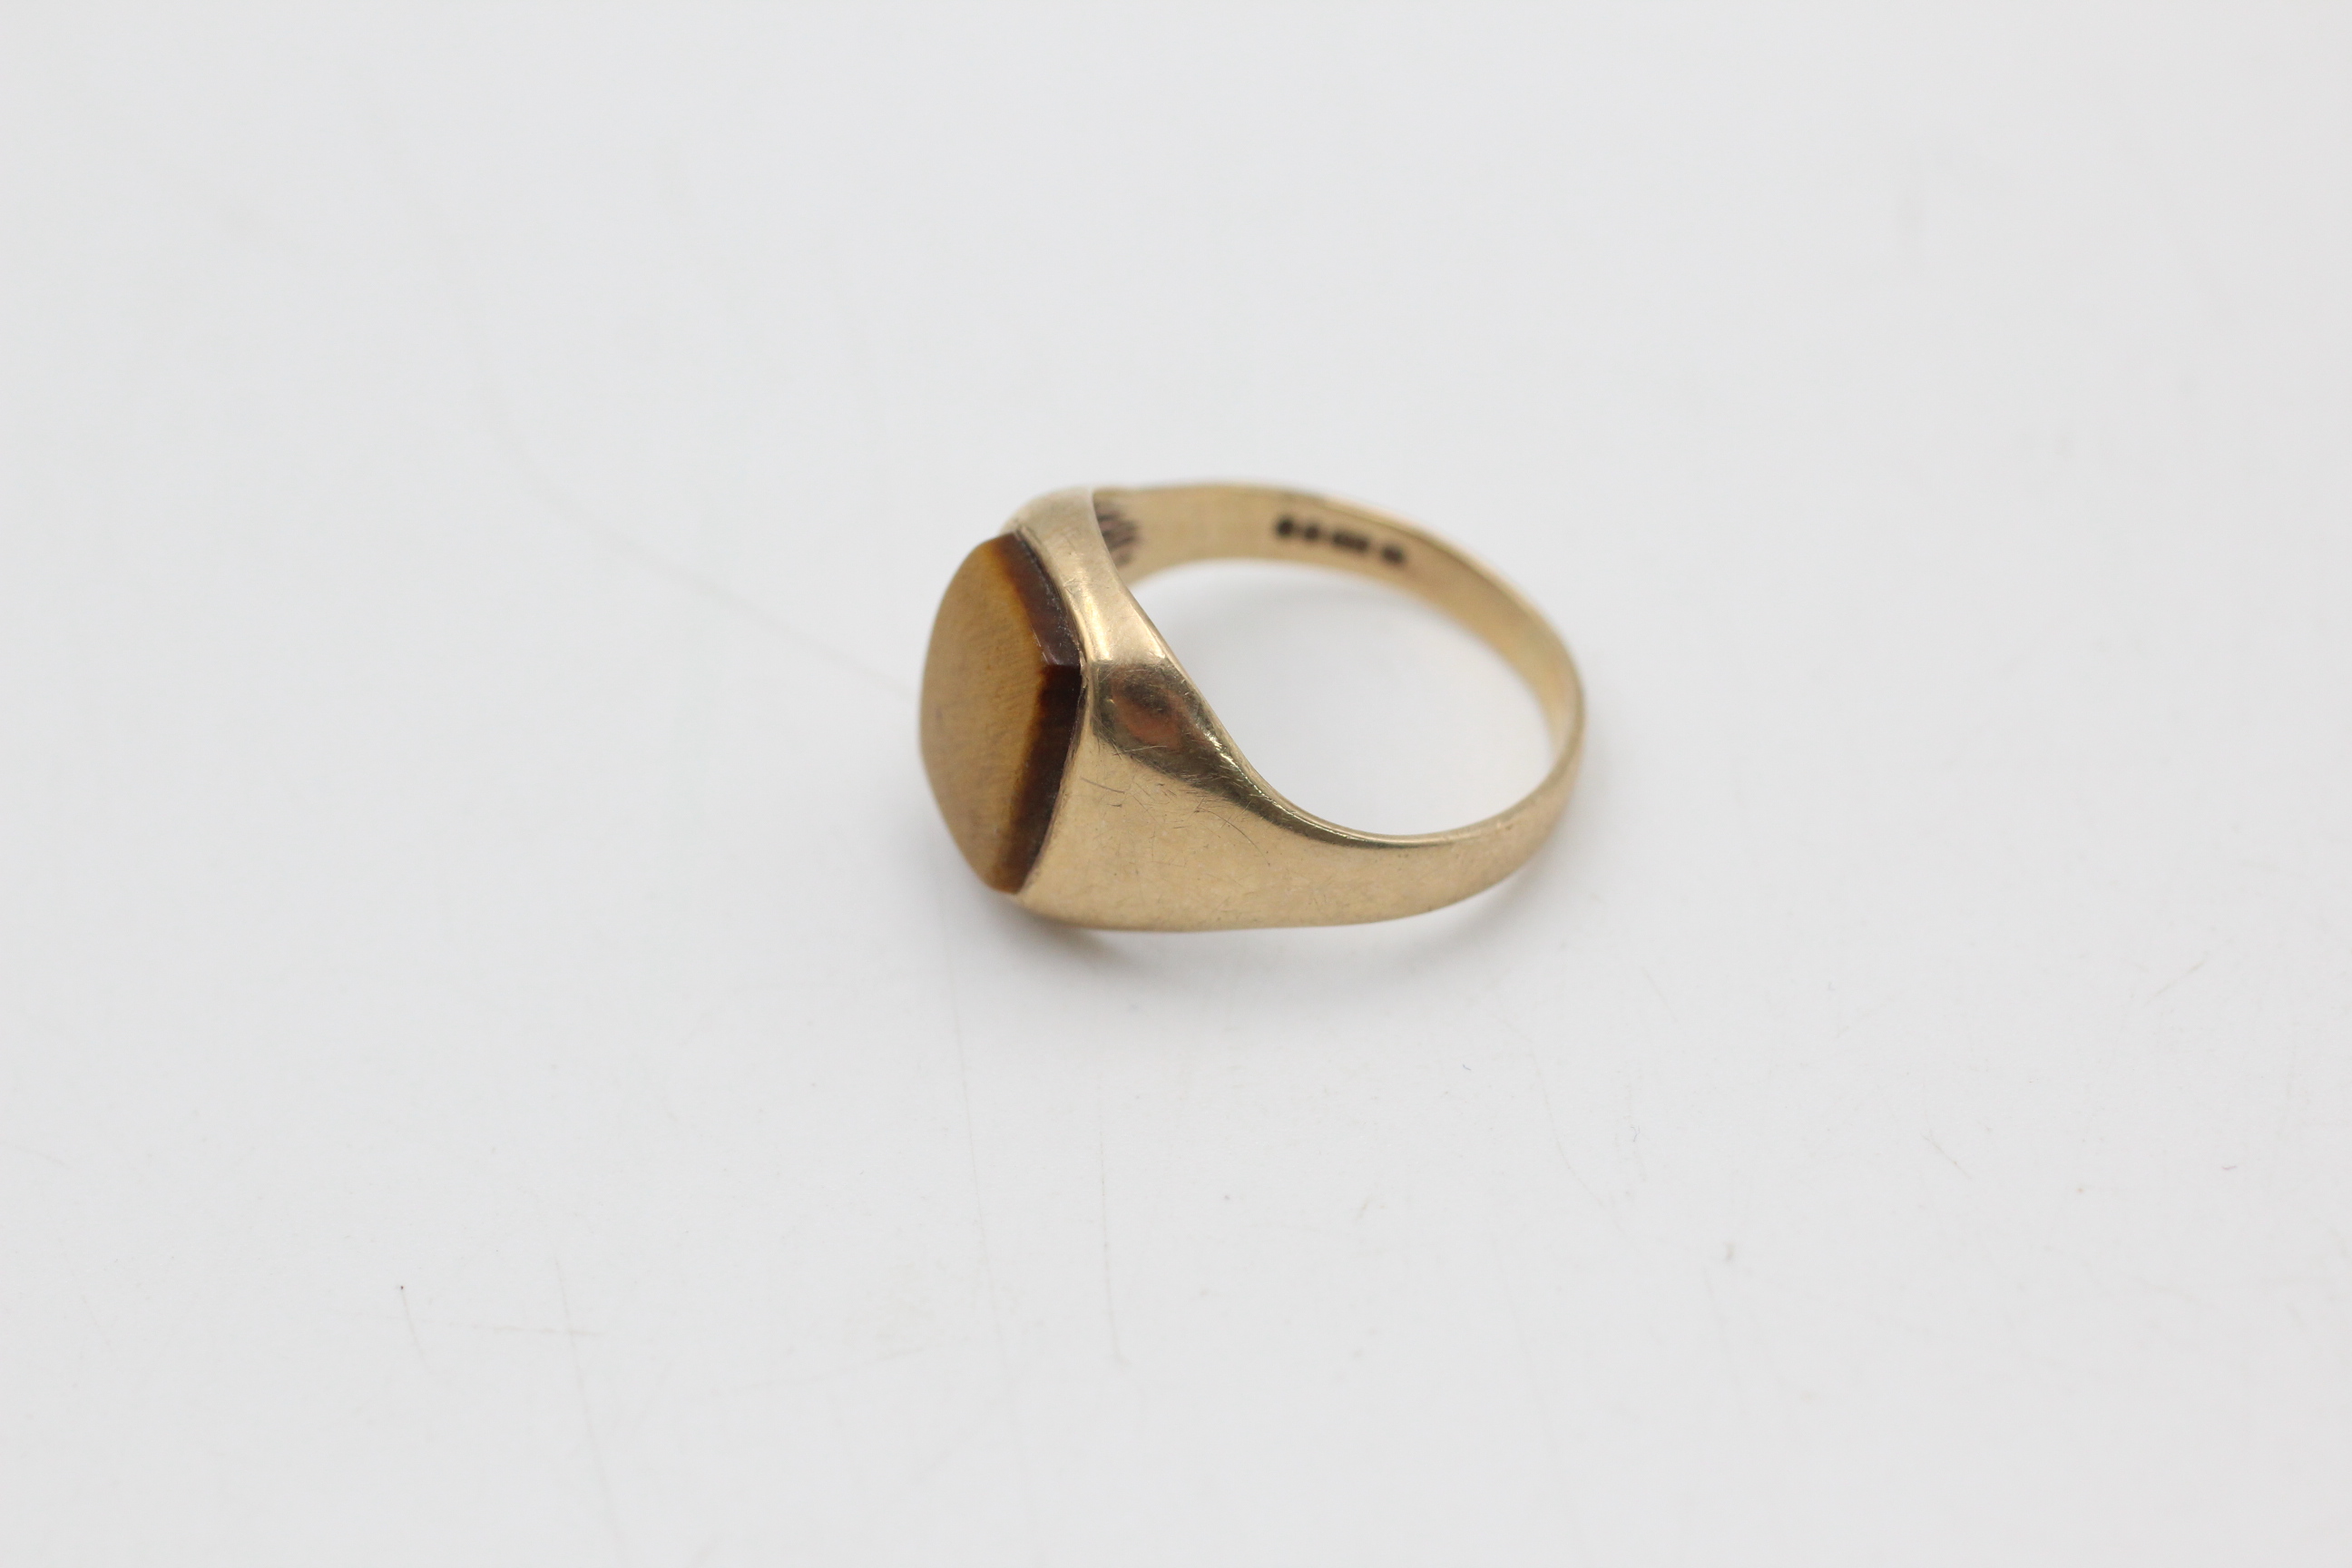 9ct gold tigers eye ring (3.8g) - Image 2 of 5